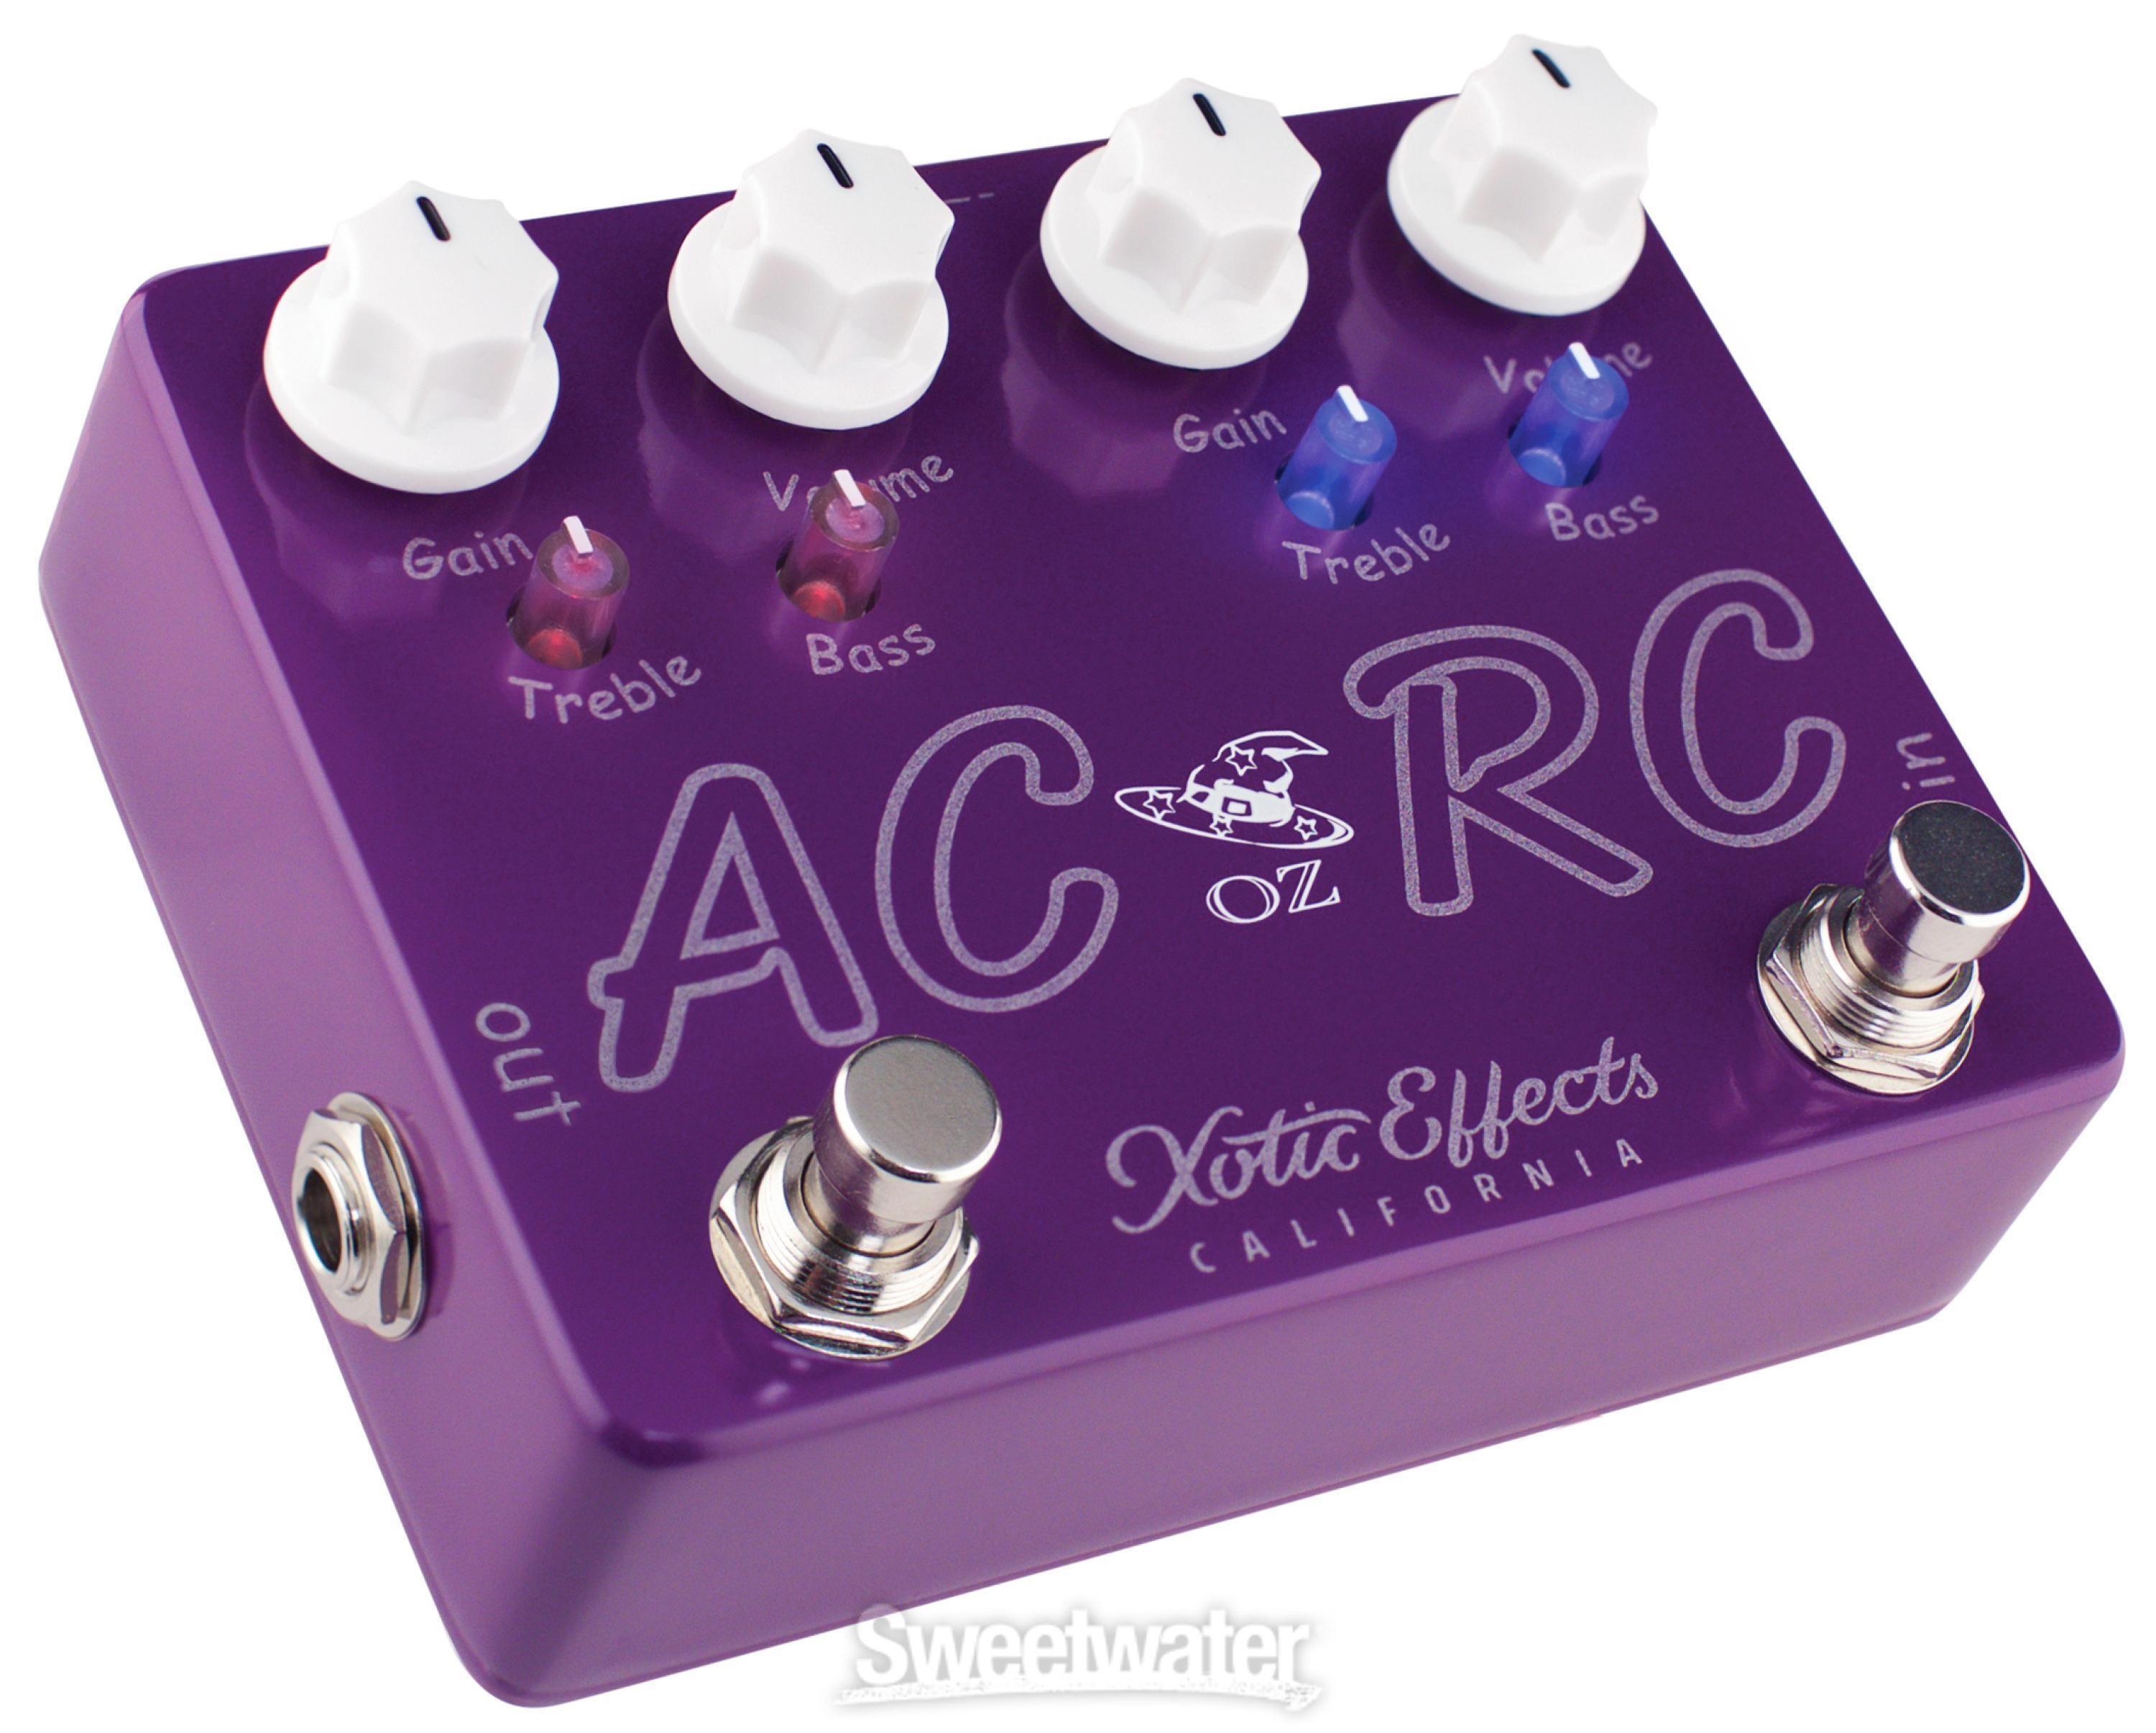 Xotic AC/RC-OZ Booster Pedal Reviews | Sweetwater